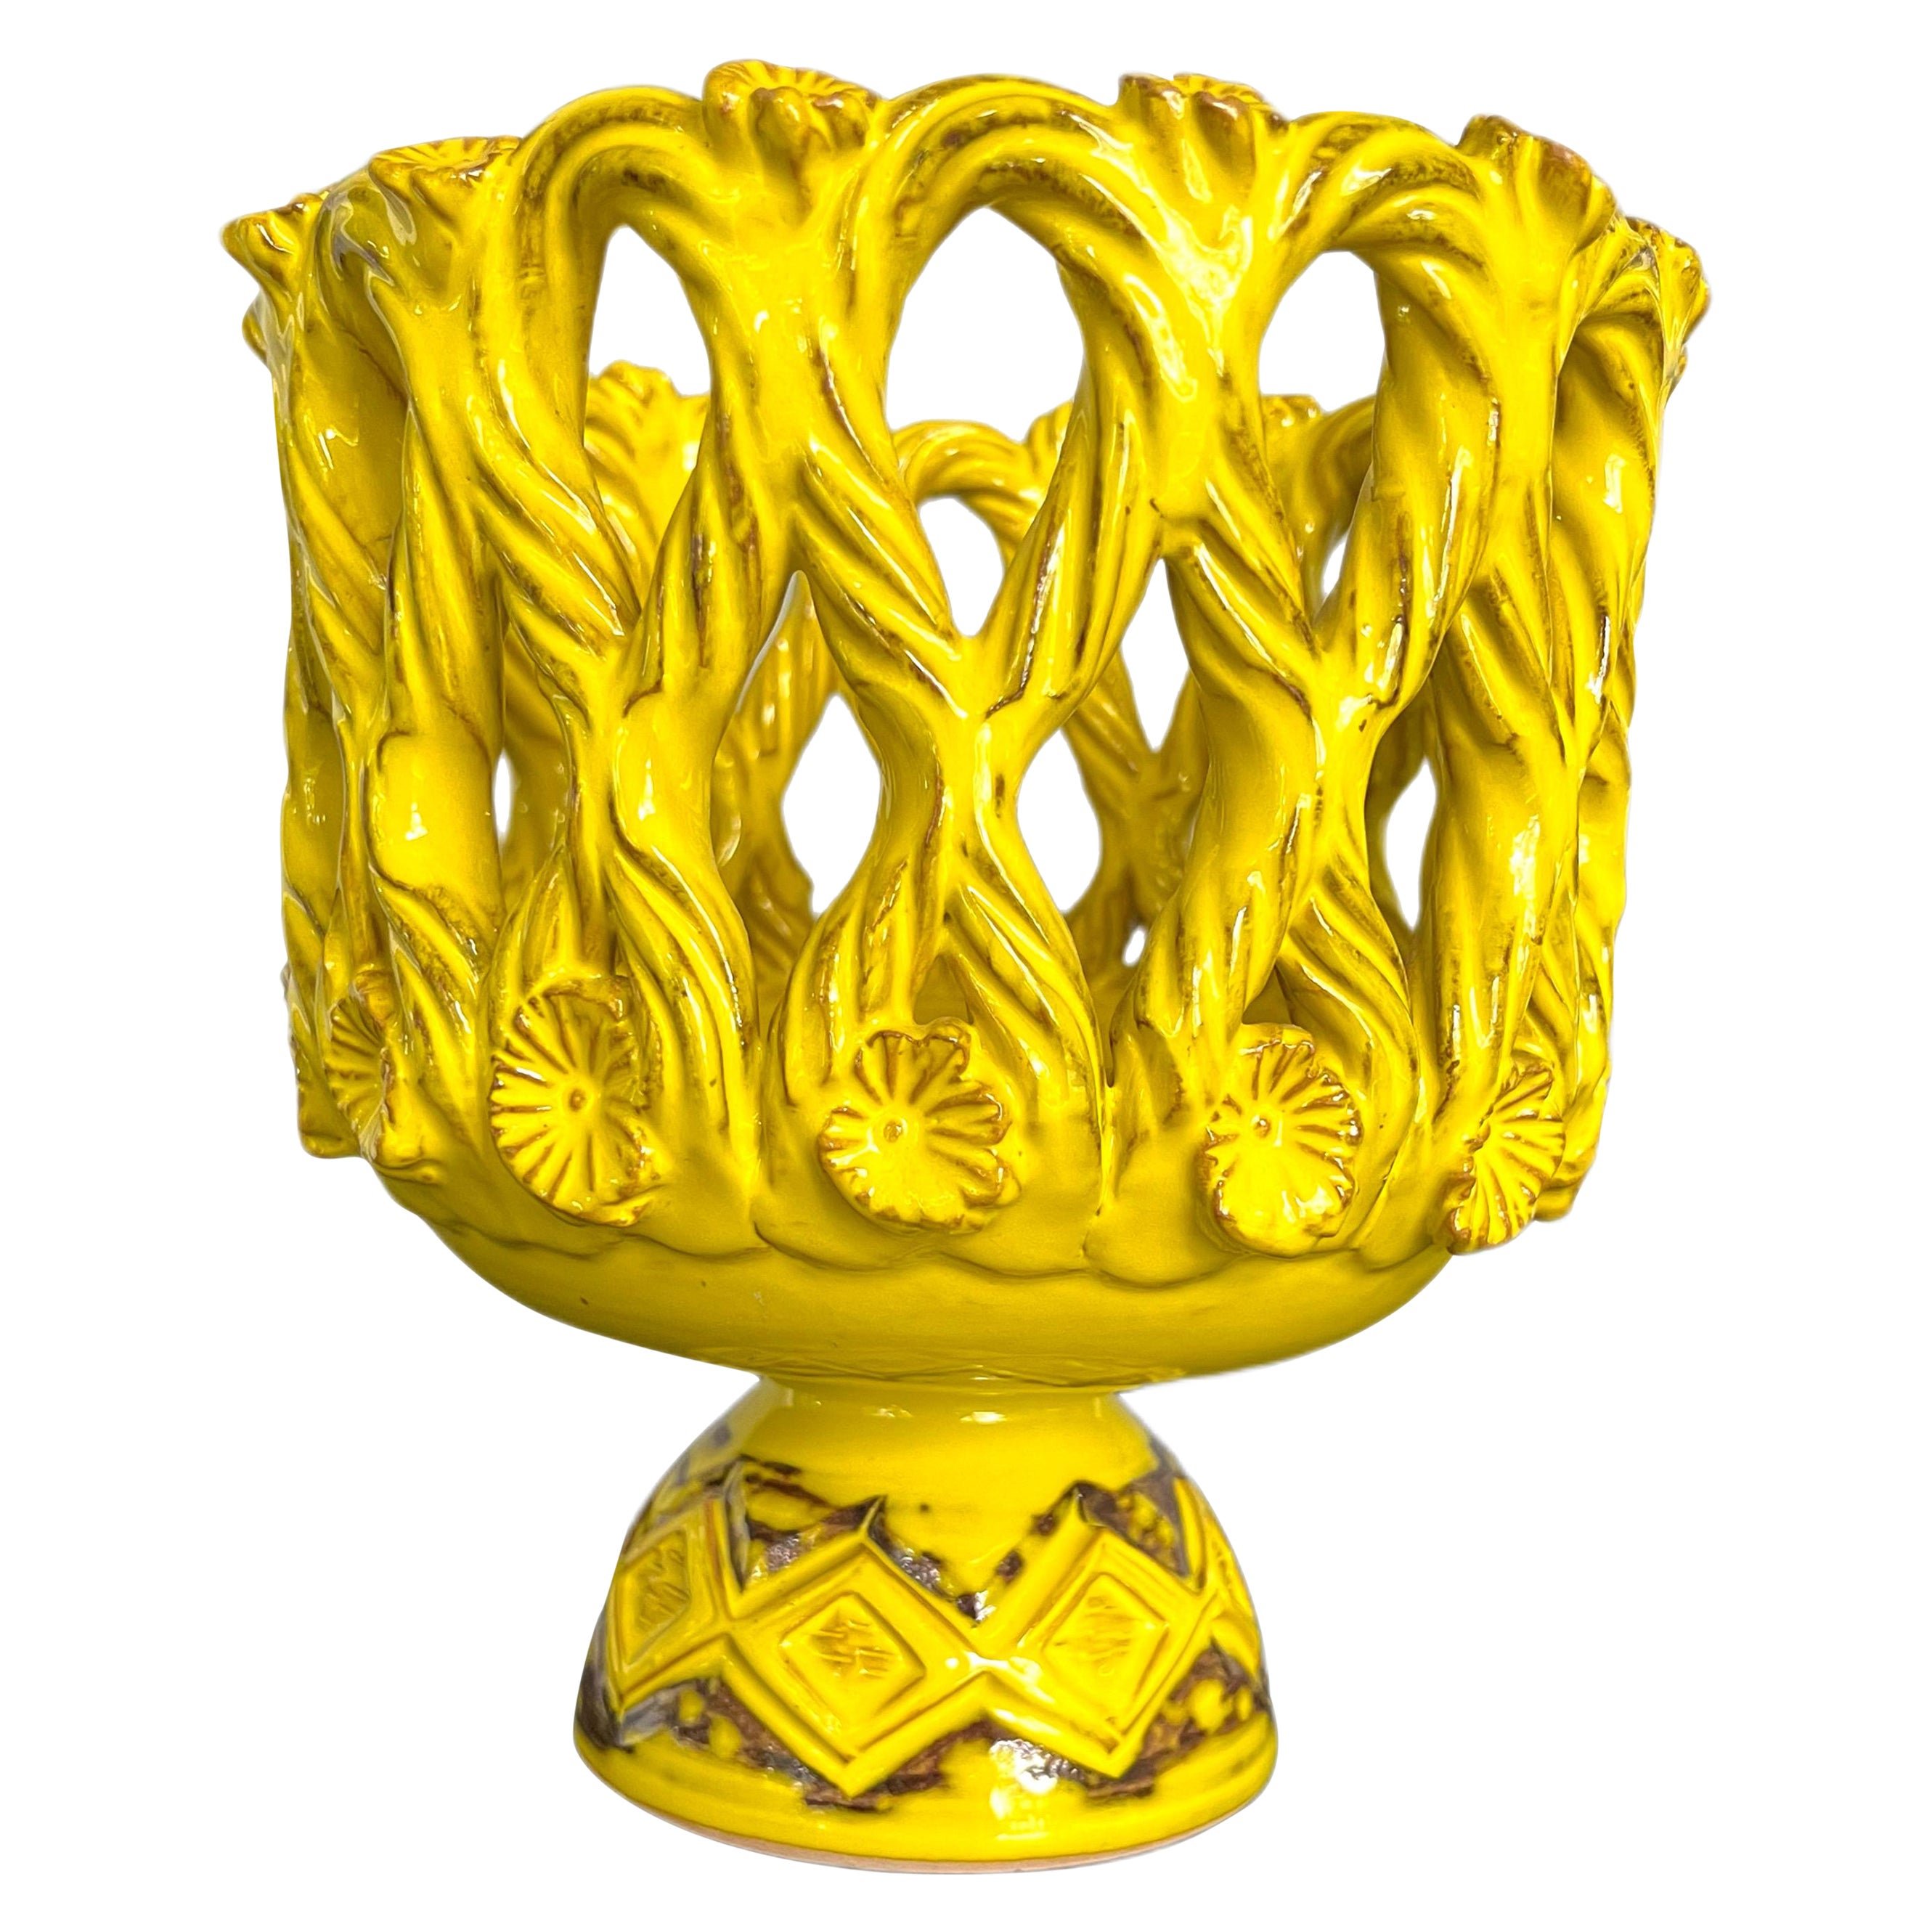 Vintage Italian Glazed Yellow Terracotta Table Centerpiece Made in, 1967 For Sale